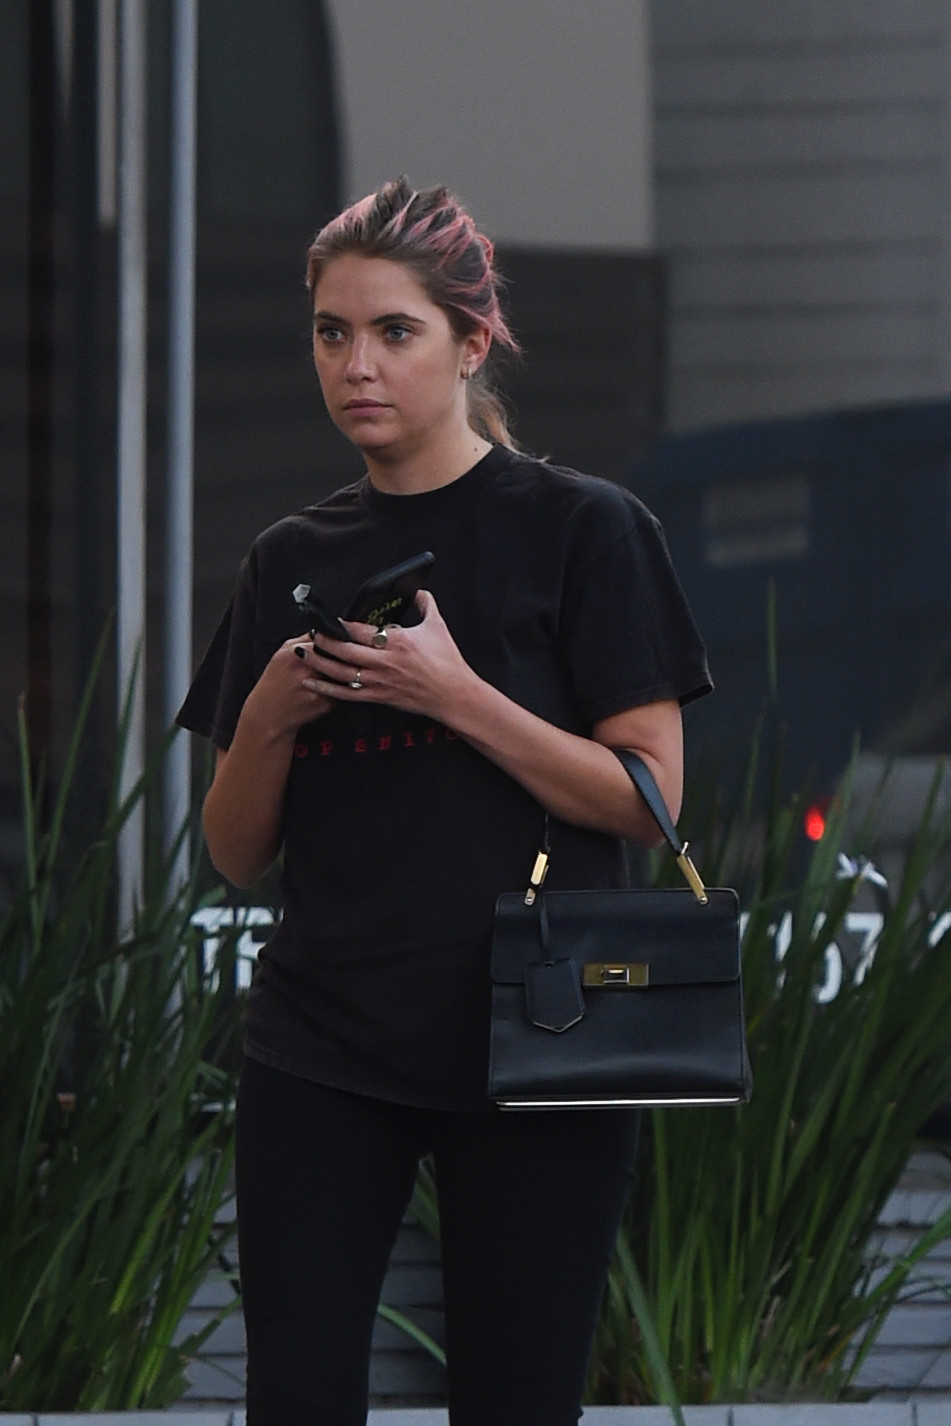 Ashley Benson shows off her new pink hair as she leaves Meche Salon